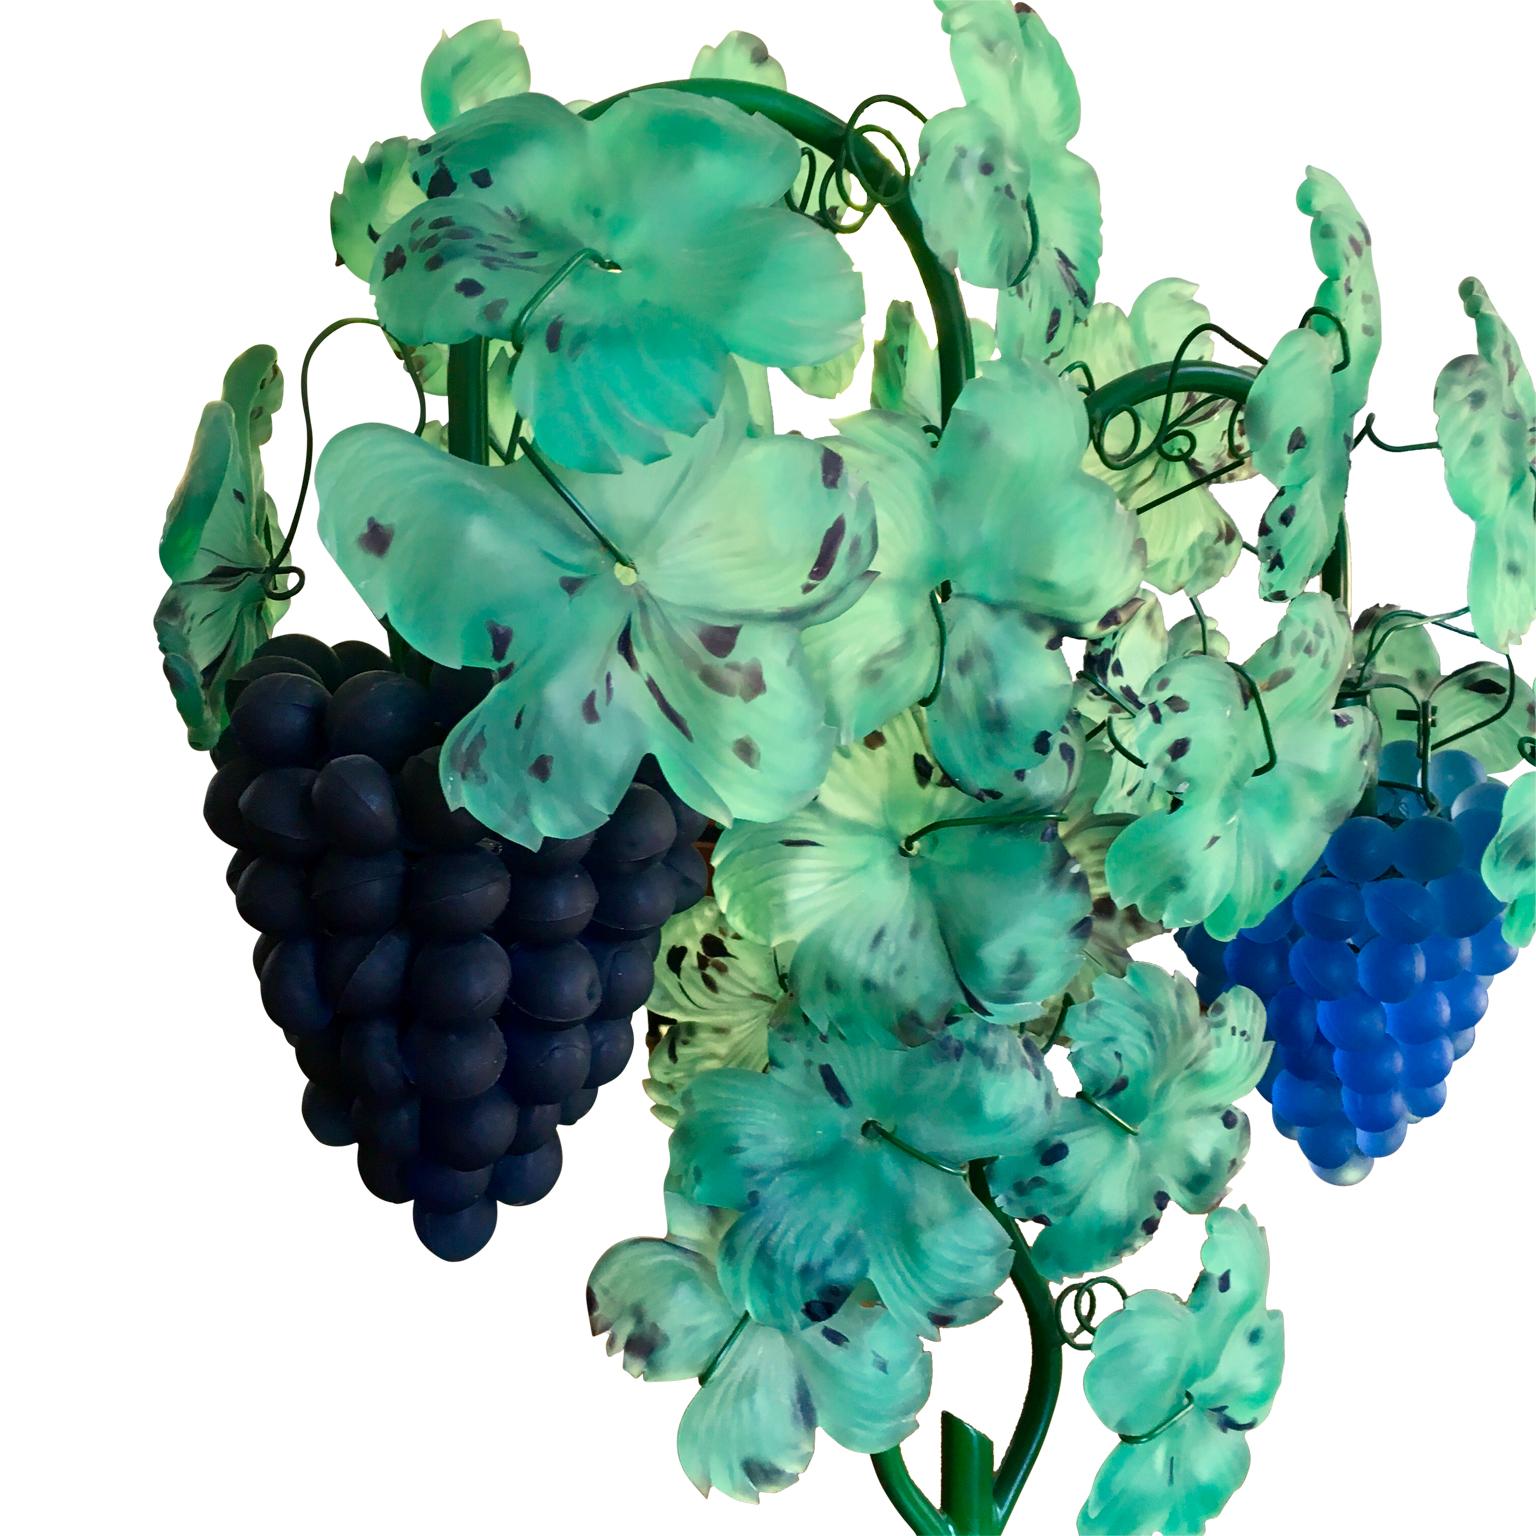 Italian Mid-Century Modern Murano art glass grape and leaf table lamp

A Venetian Italian art glass Murano grape bunch and leaf table lamp. Vines and clusters of grapes. Hand blown art glass, so realistic in gorgeous colors of purples and greens.